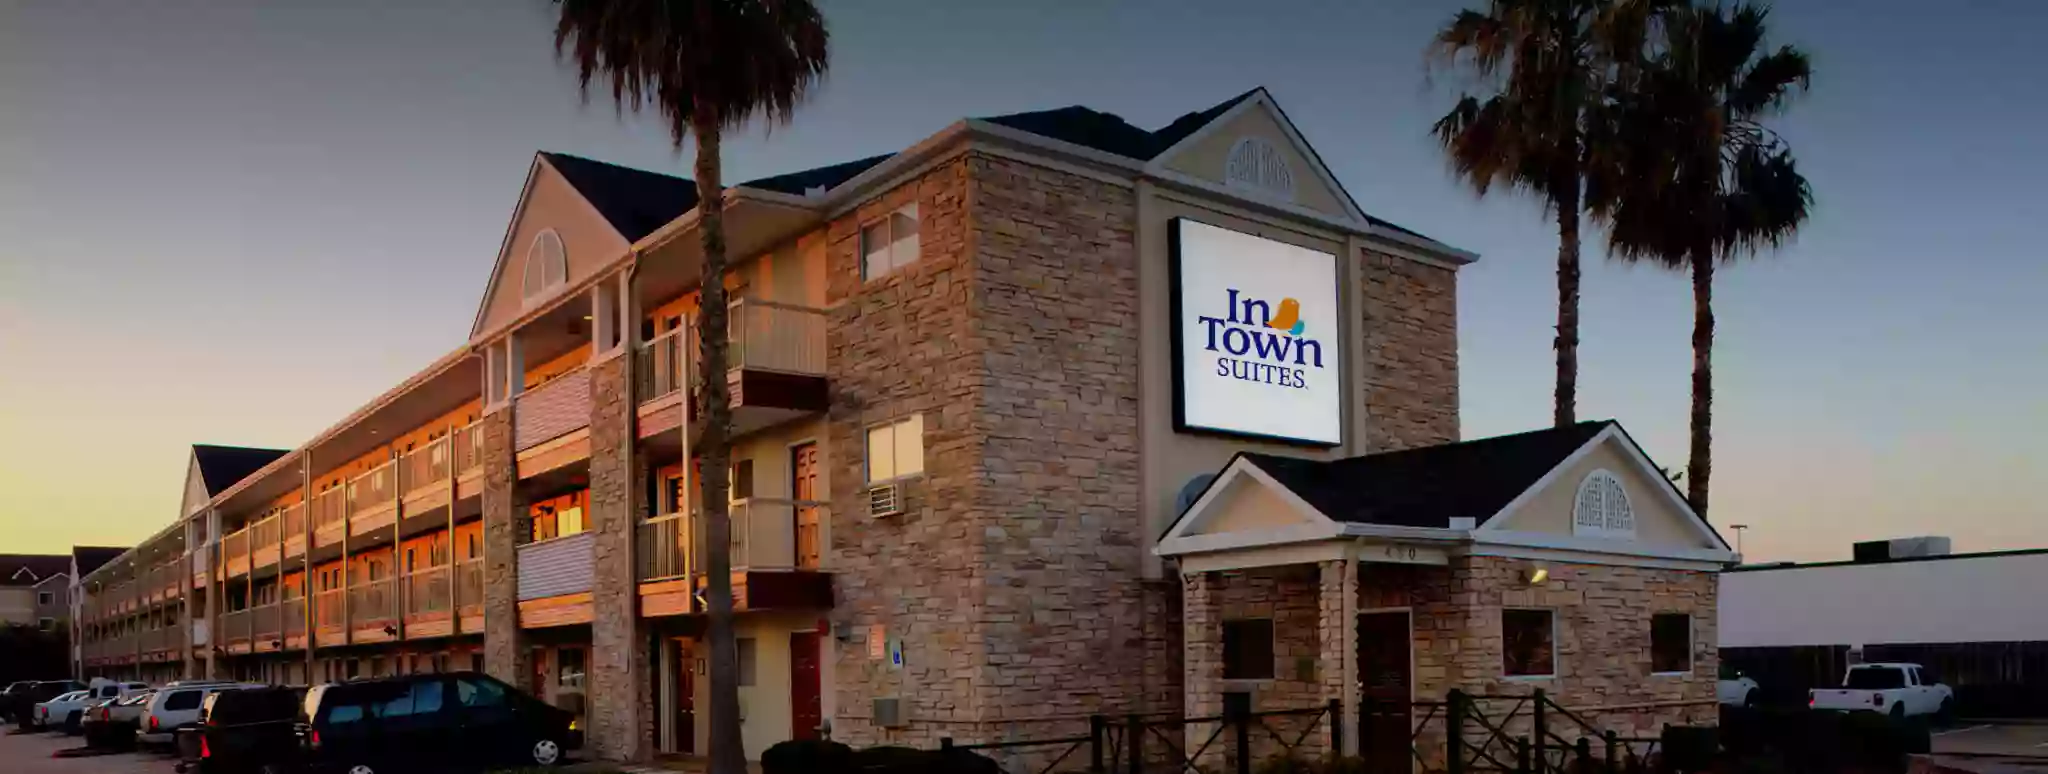 InTown Suites Extended Stay Select New Orleans LA - Harvey